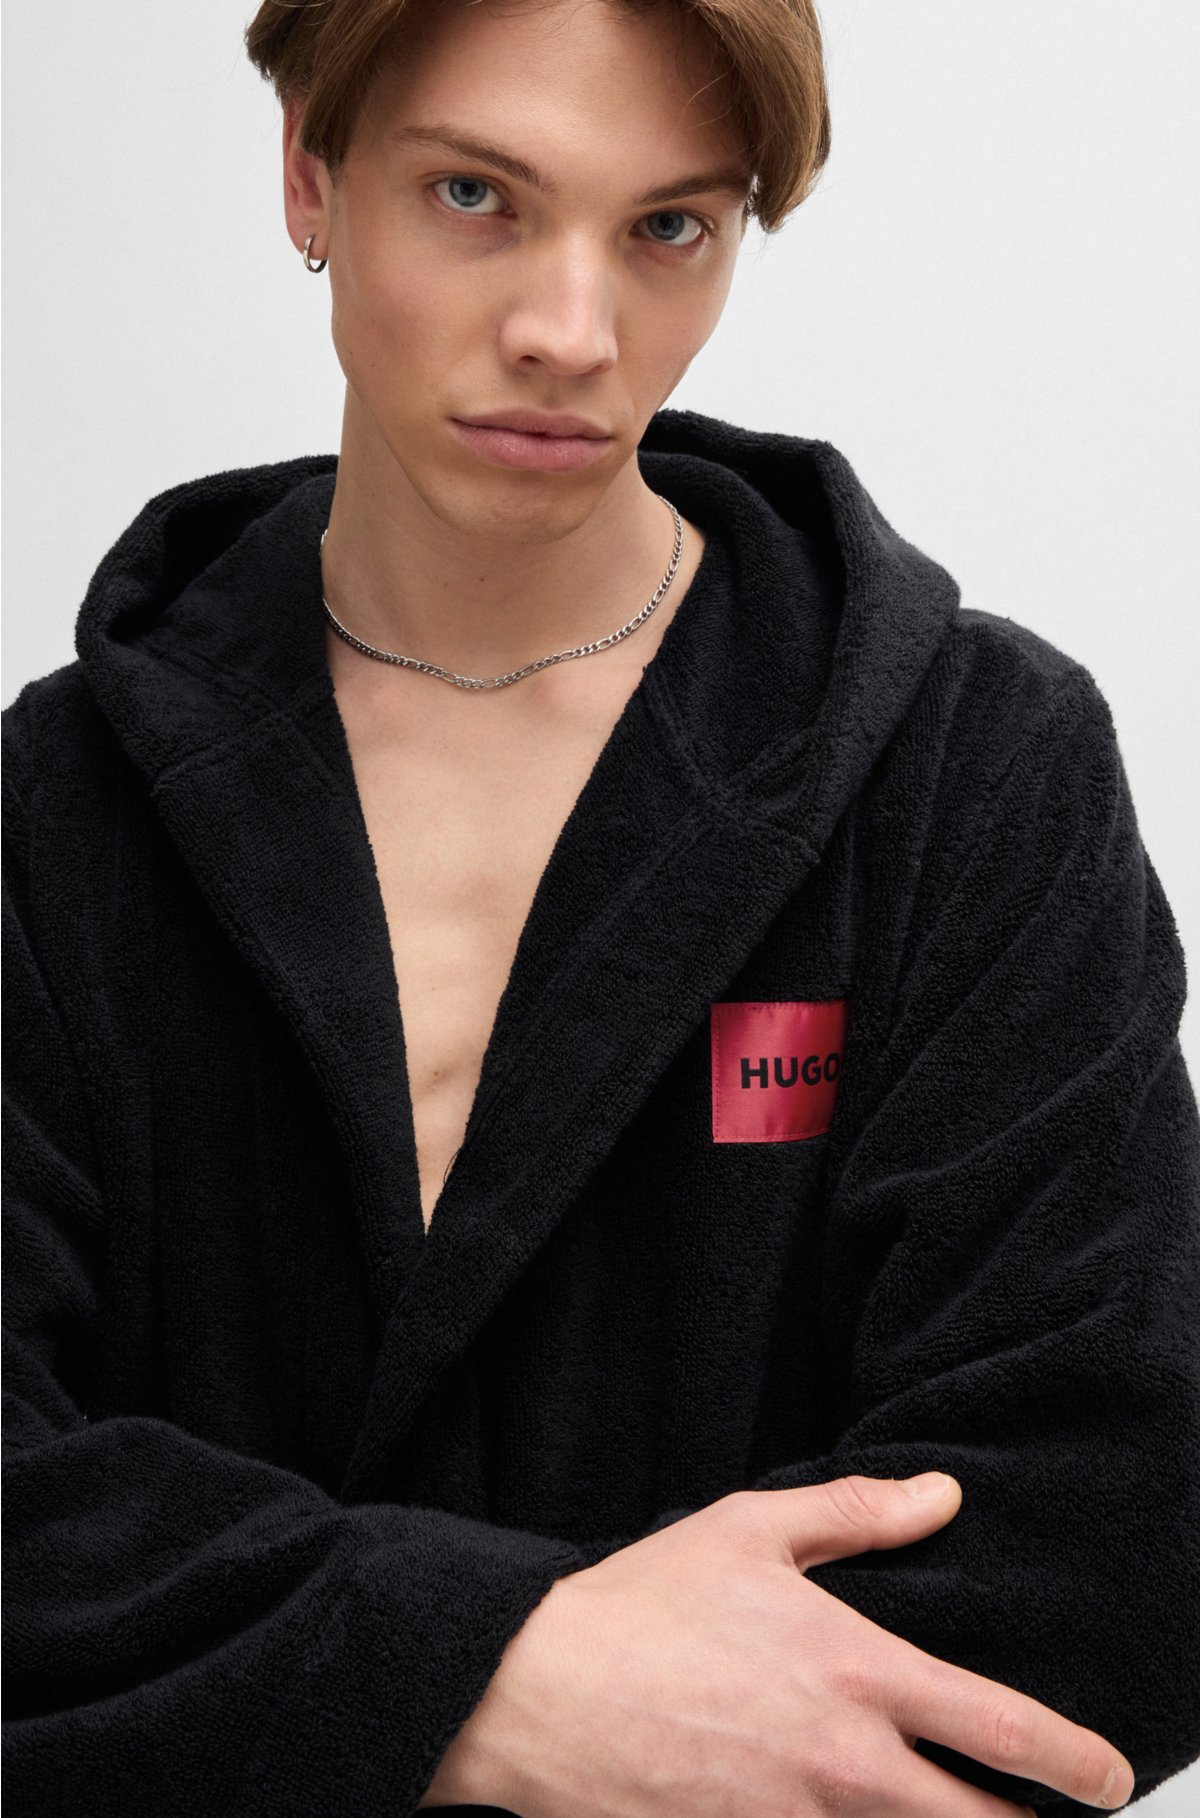 HUGO - Cotton-terry hooded dressing gown with red logo label | Nachthemden